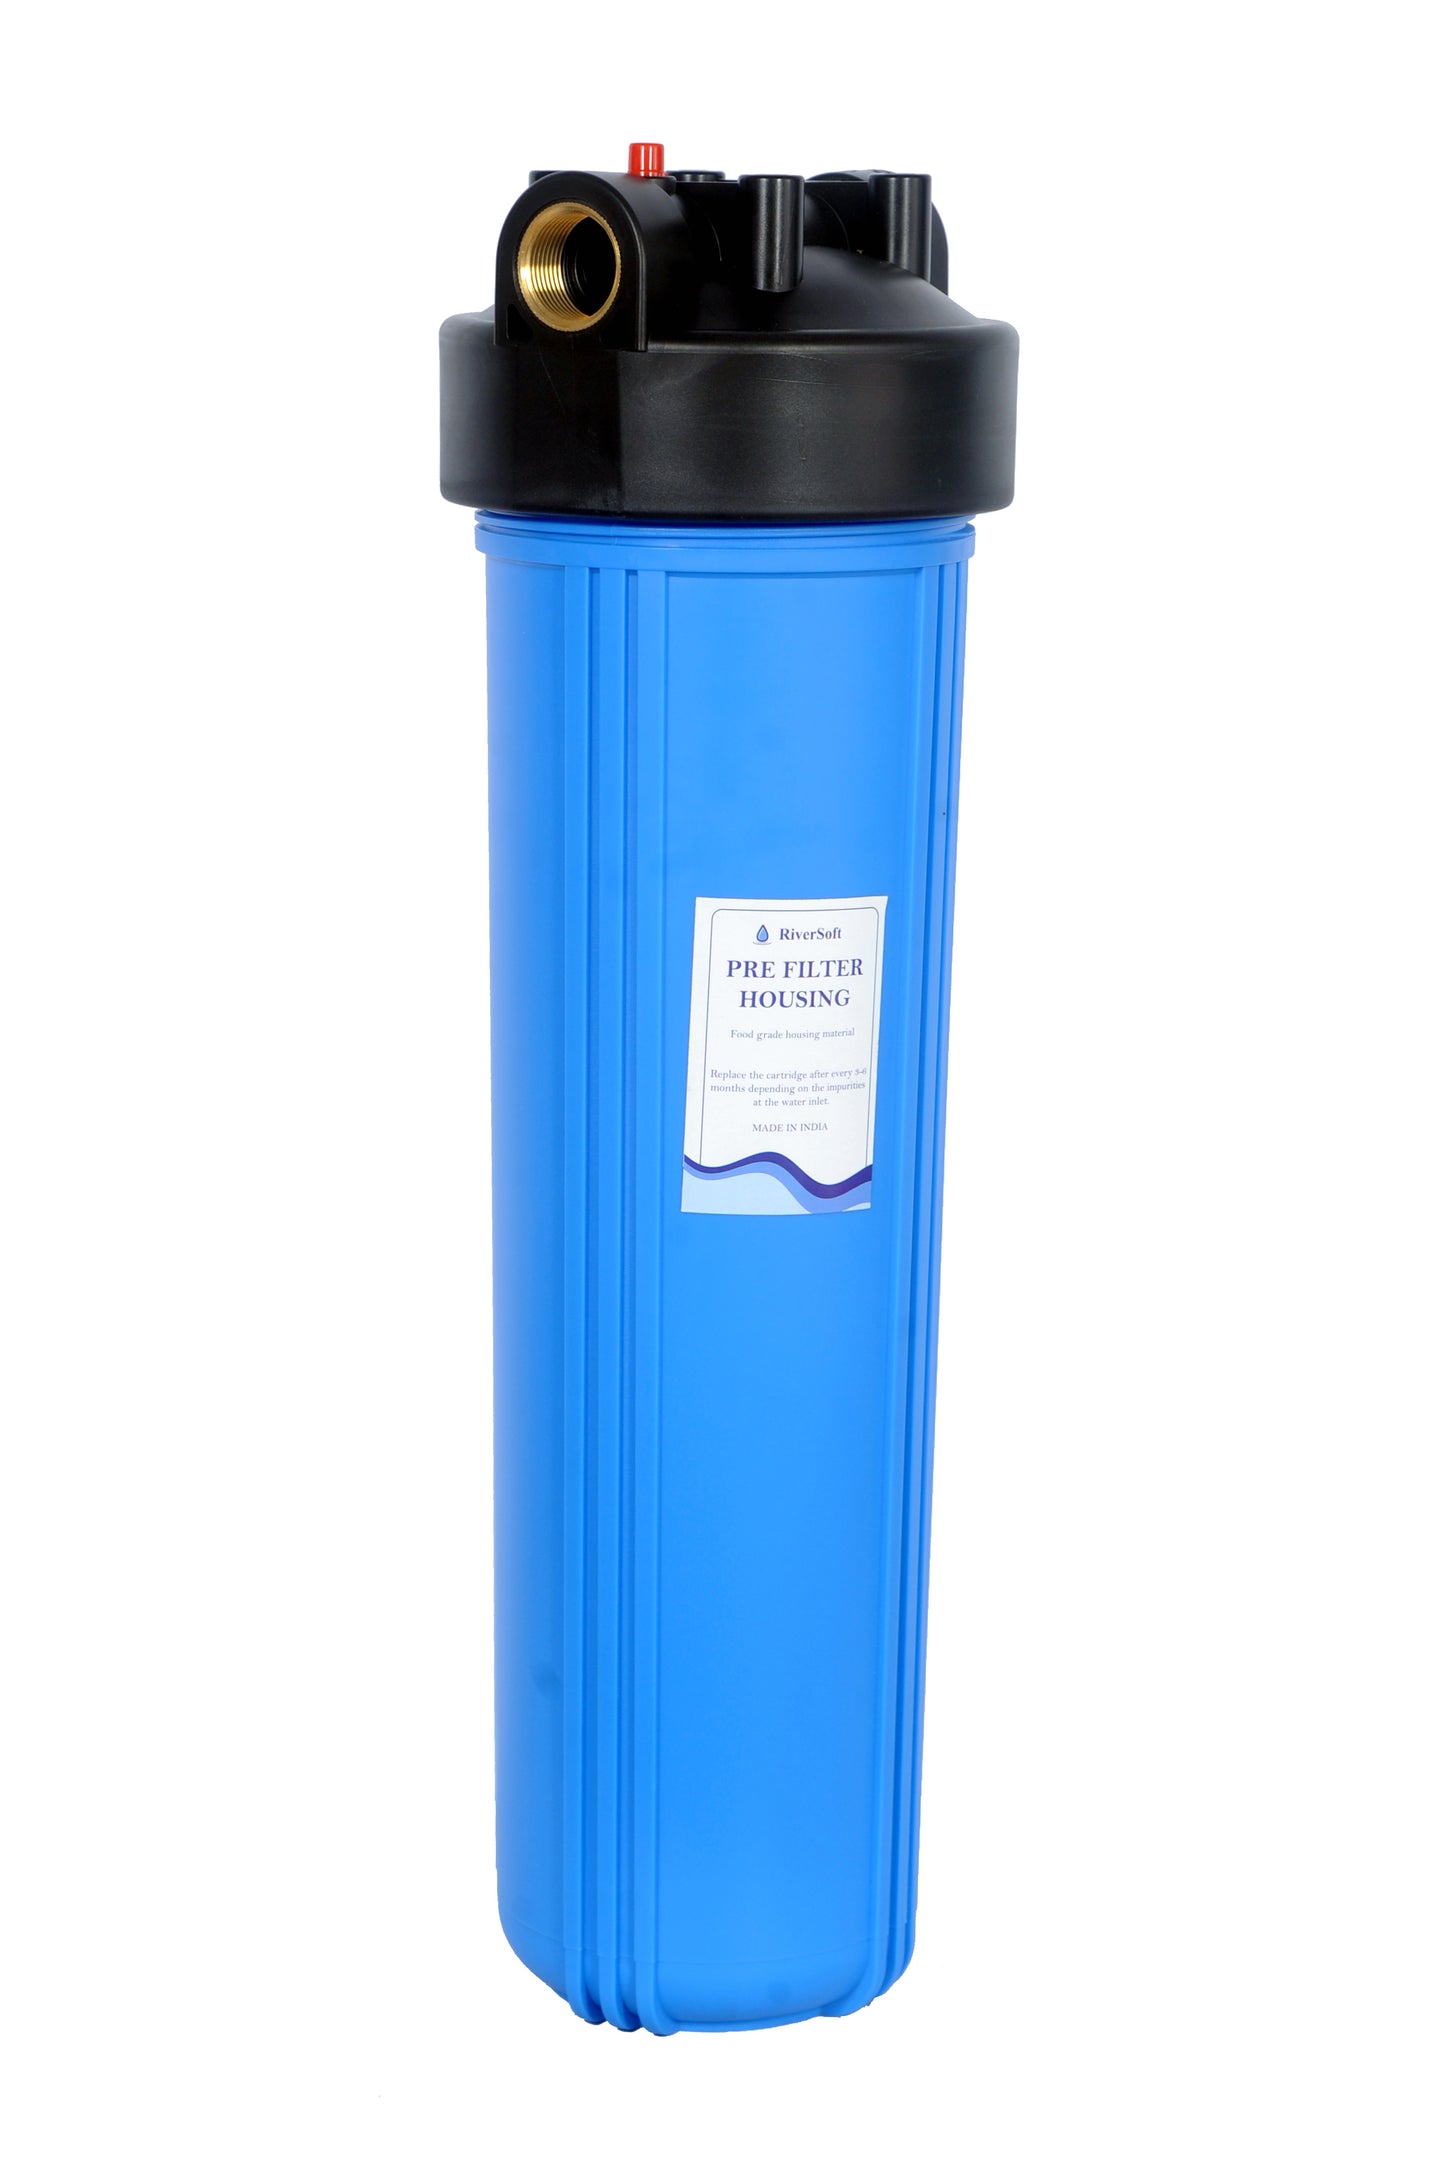 RiverSoft Sediment Filter Assembly ASP-20-HV5, Spun Cartridge 5 Micron For Filtering Sediments, Install In Mainline for 1 HP/2 HP motor (20 inch, 5 Micron, 1 inch inlet/outlet, Blue, PP)